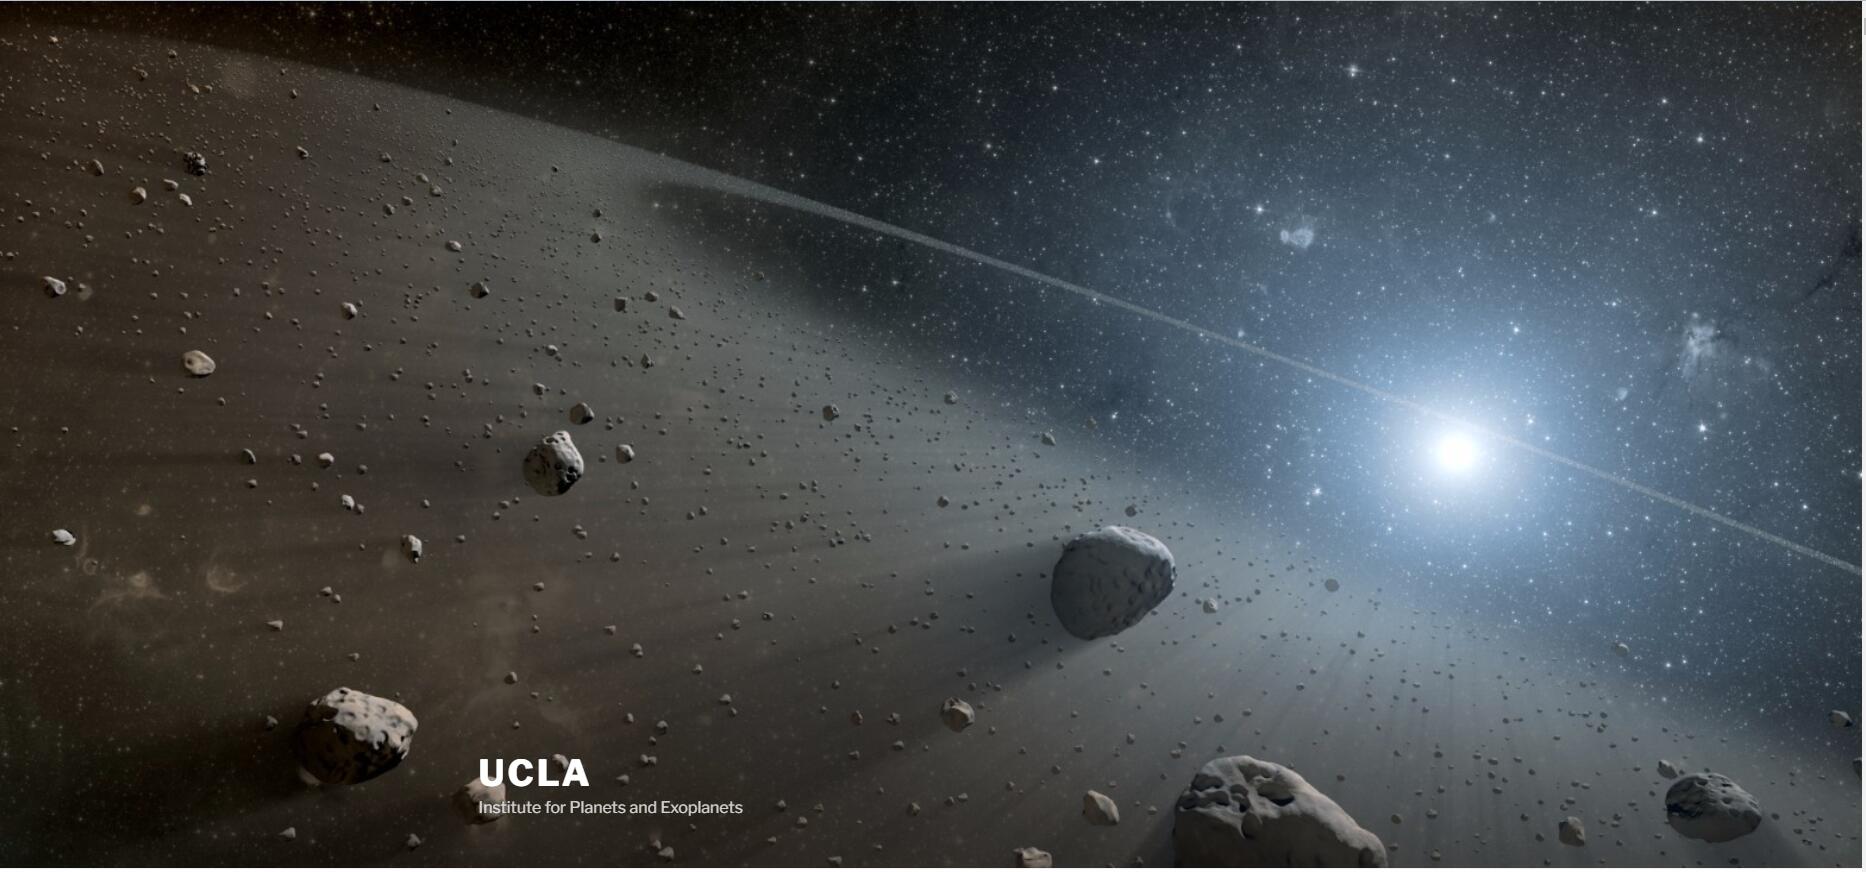 UCLA – Institute for Planets and Exoplanets